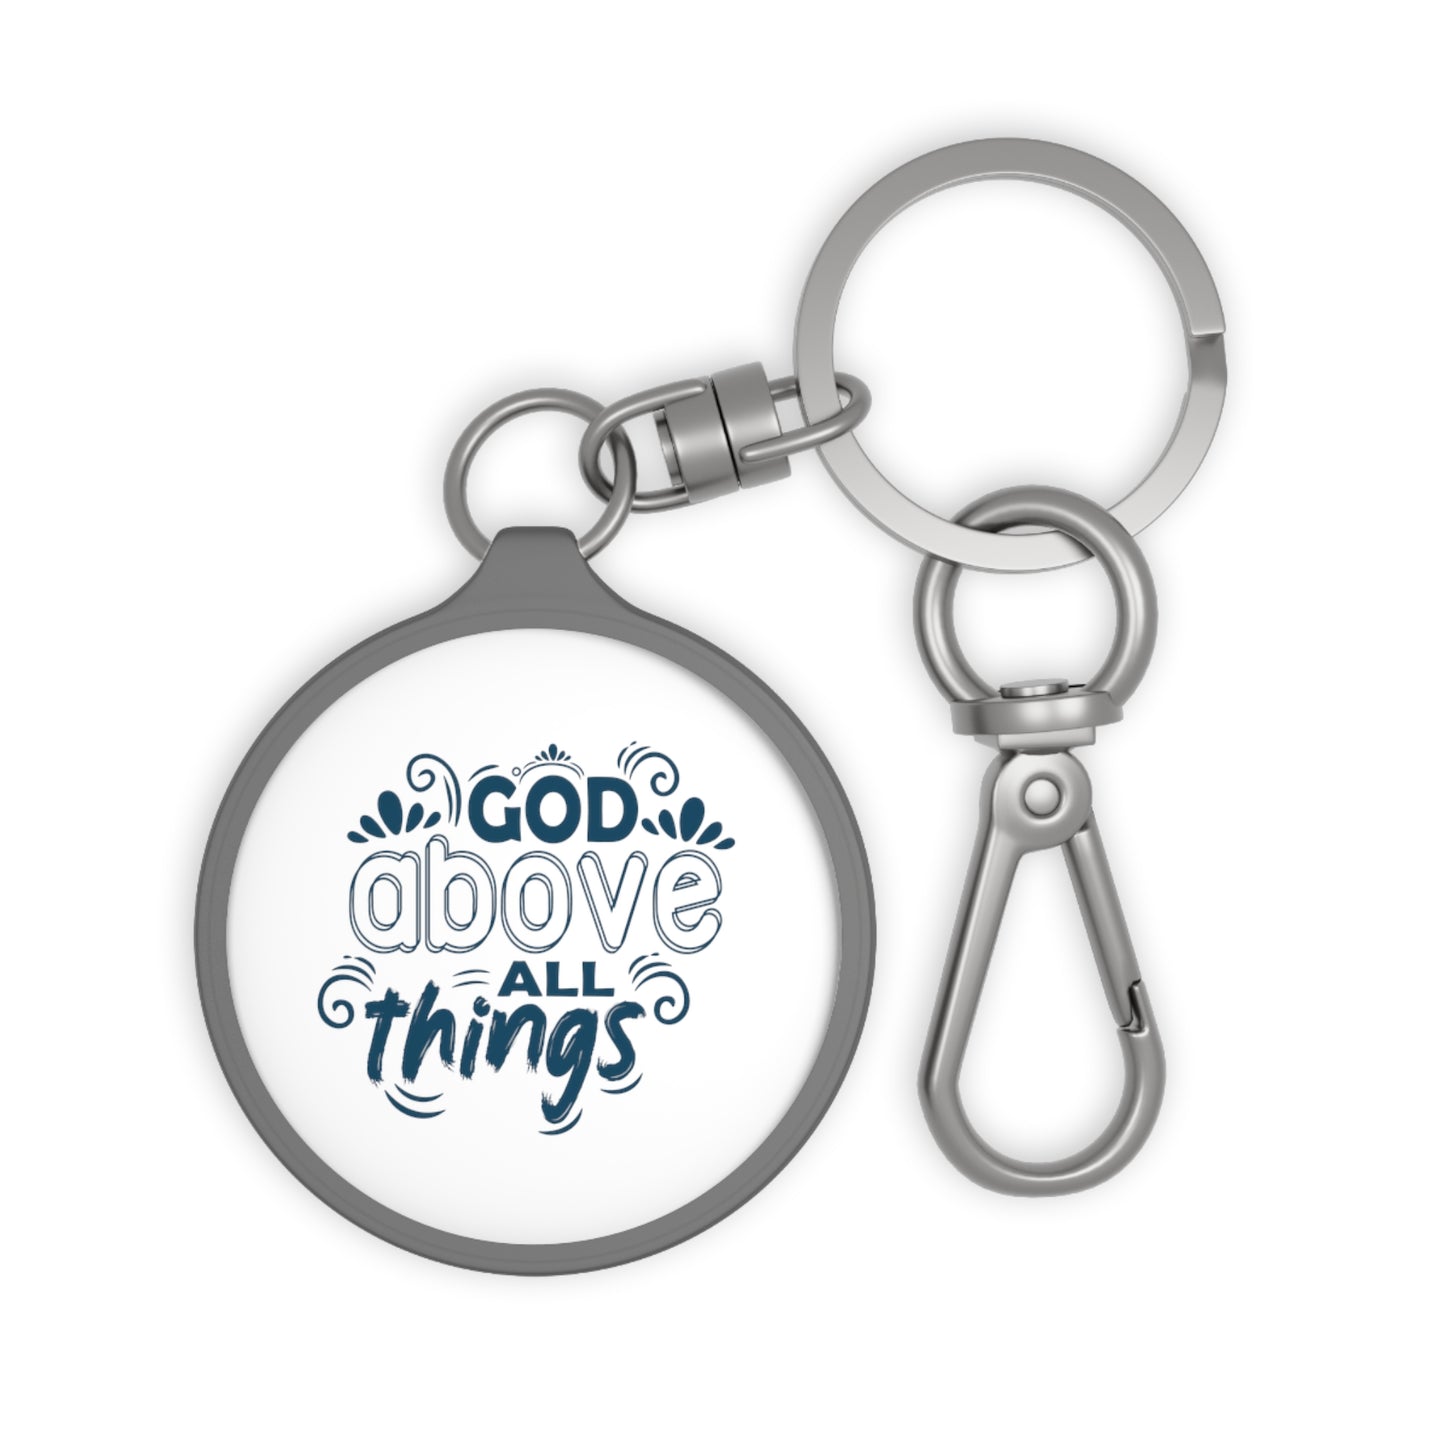 God Above All Things Key Fob